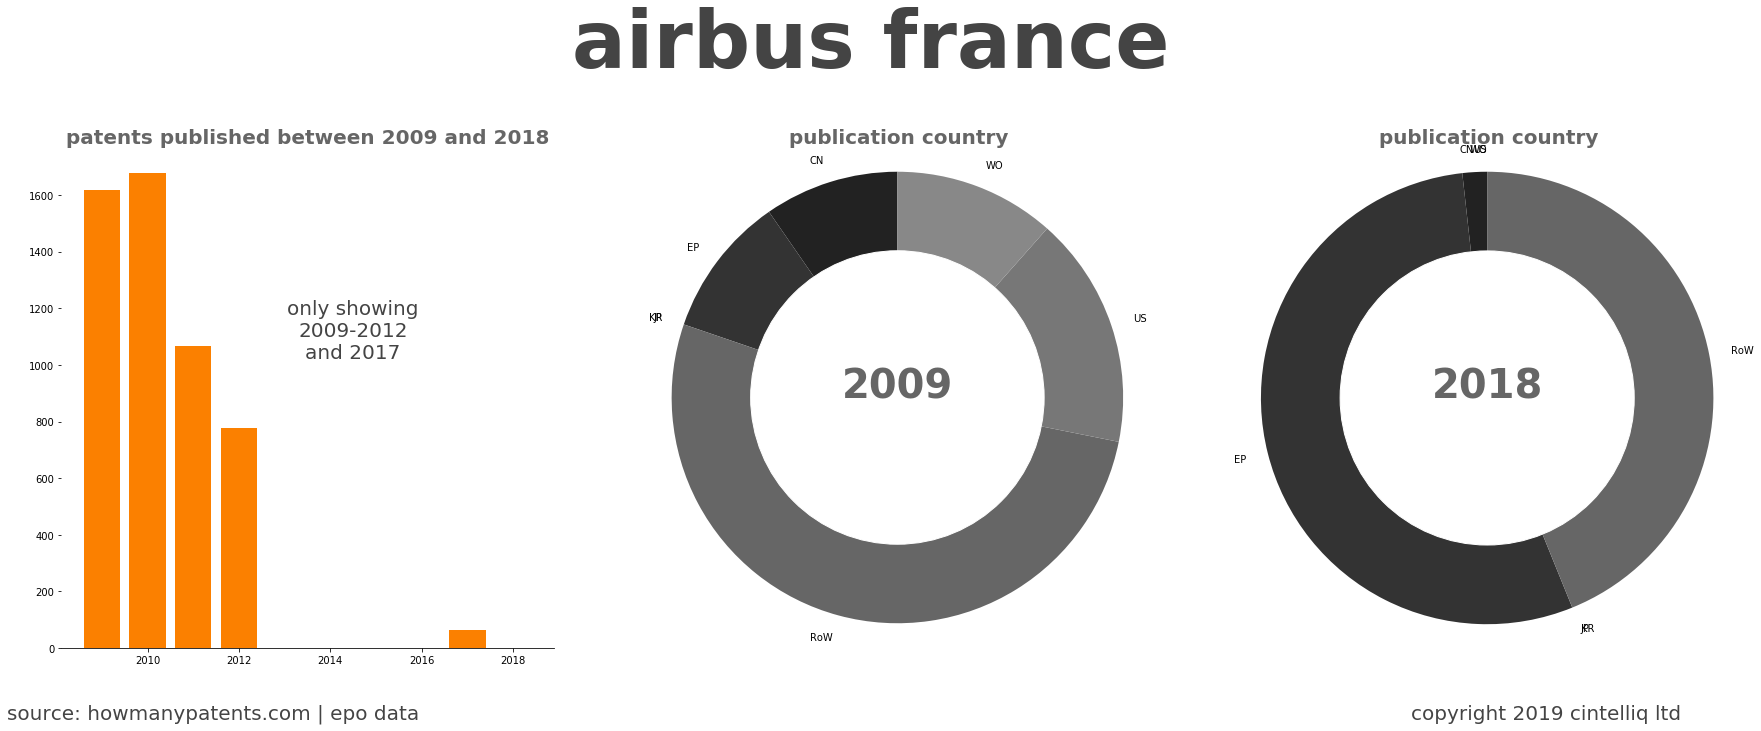 summary of patents for Airbus France